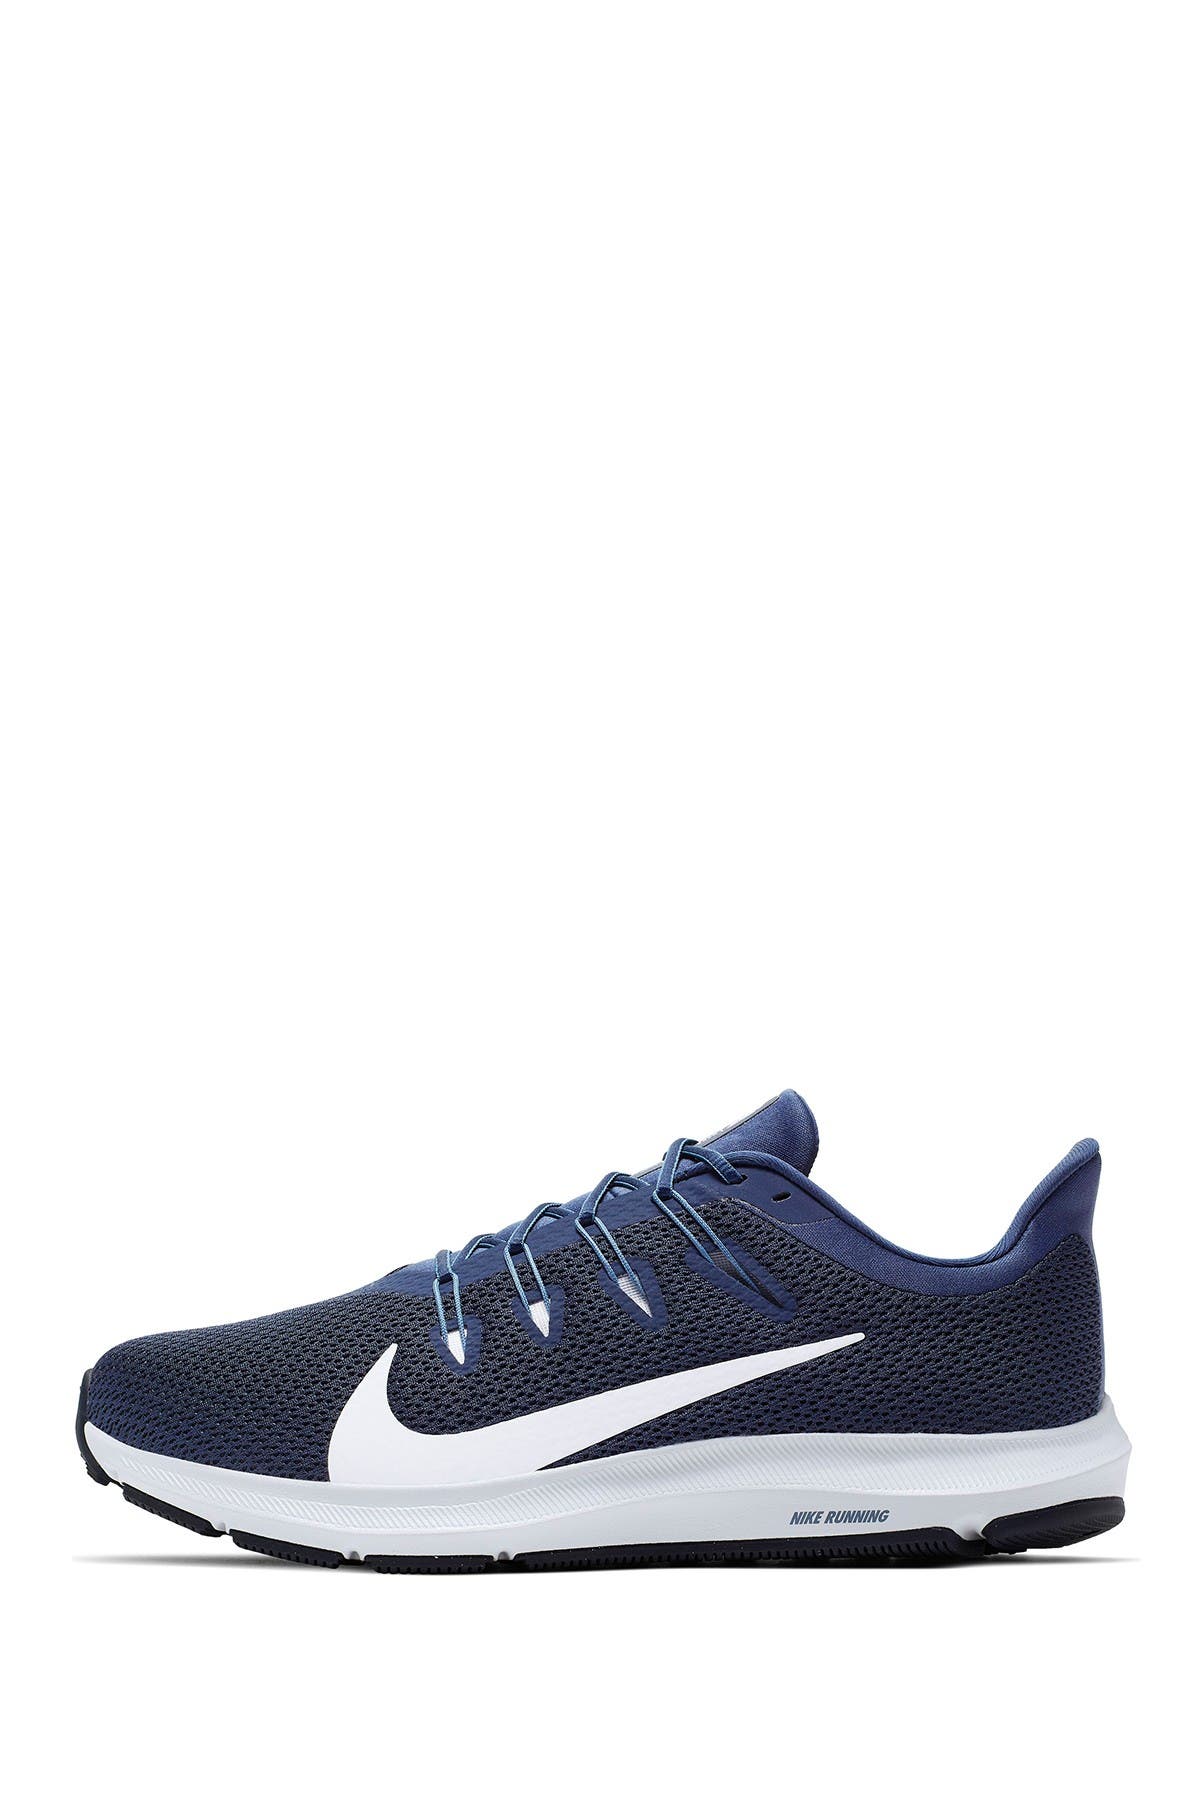 nike quest 2 extra wide